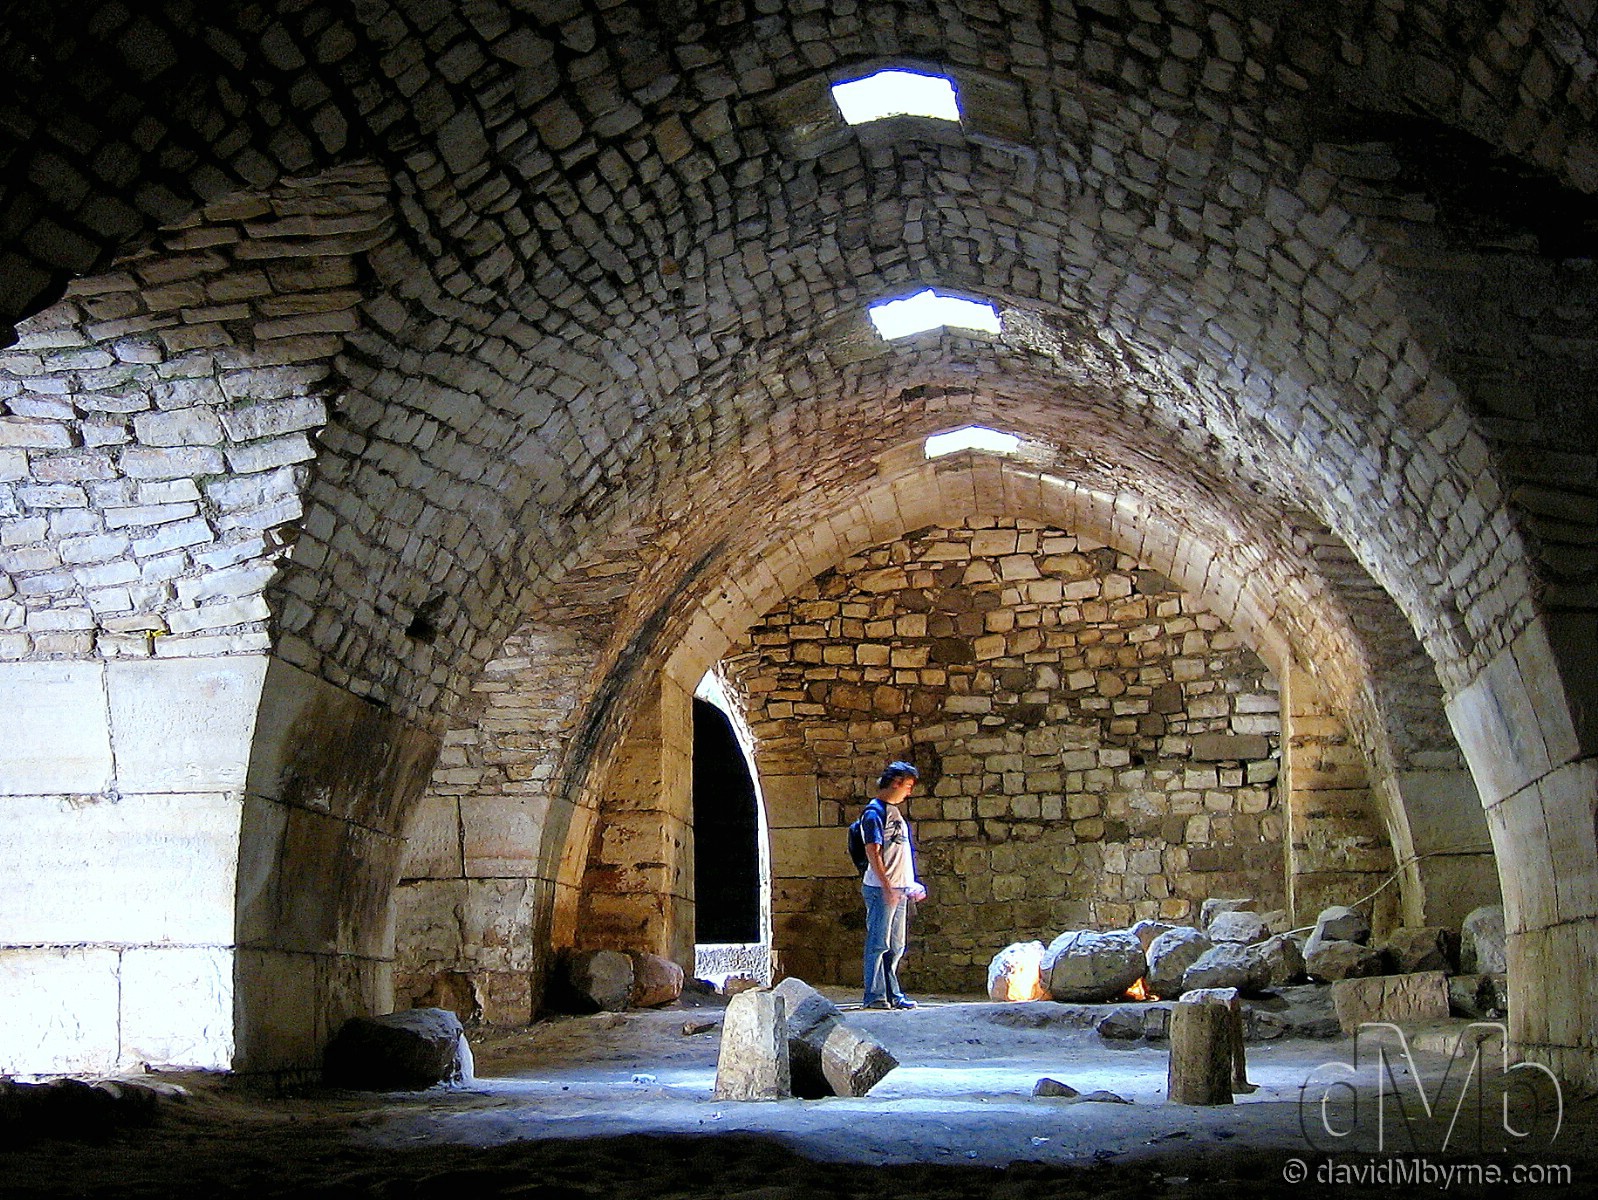 Inside the corridors of the Crac des Chevaliers, Syria. May 7th, 2008.